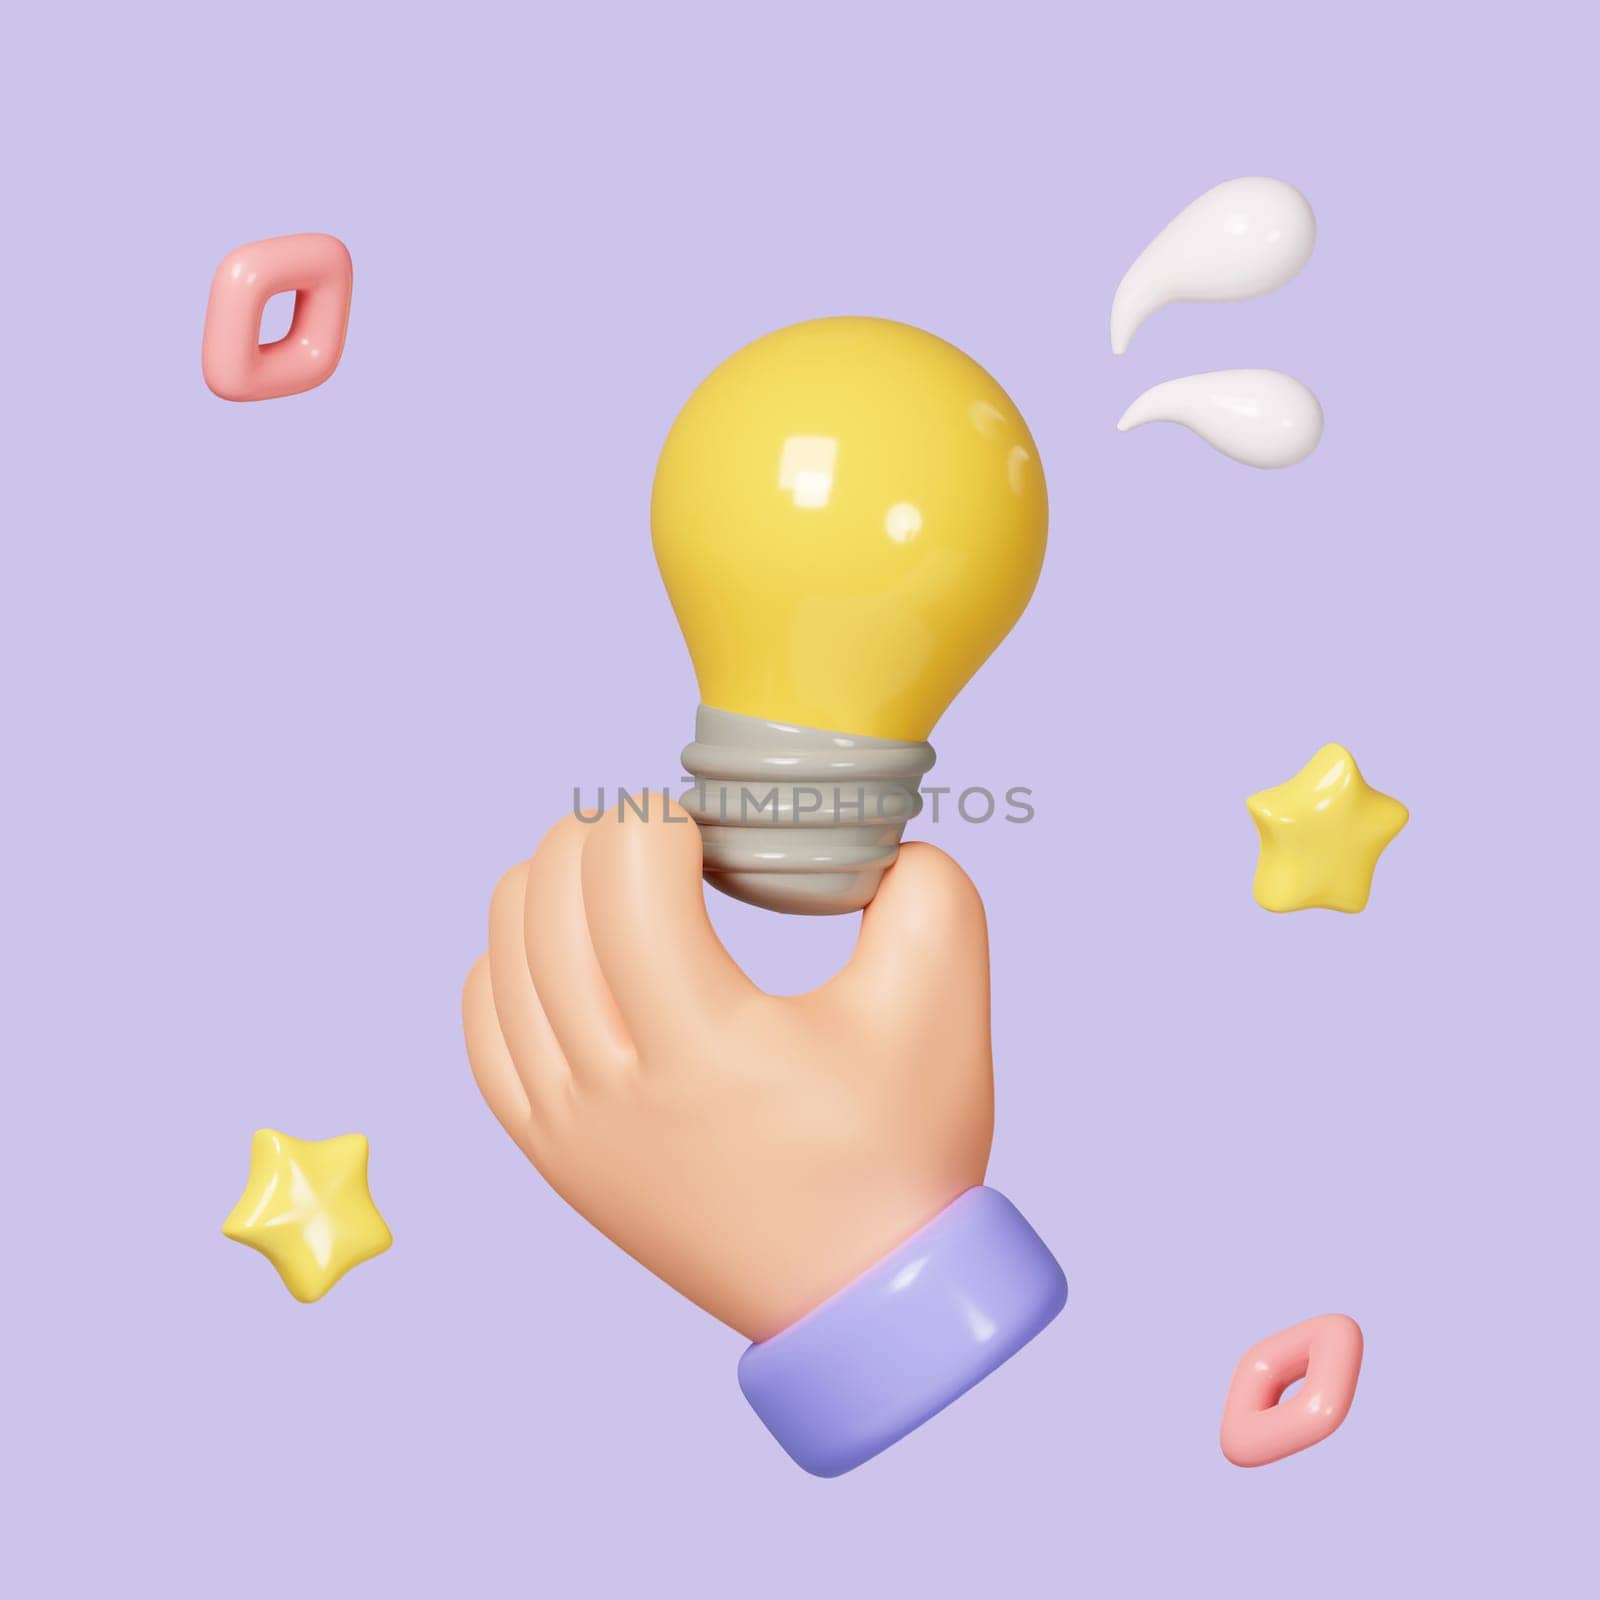 3D Hand holding Light Bulb. Employee with genius business idea. Success in work. Cartoon icon isolated on background. icon symbol clipping path. 3d render illustration by meepiangraphic